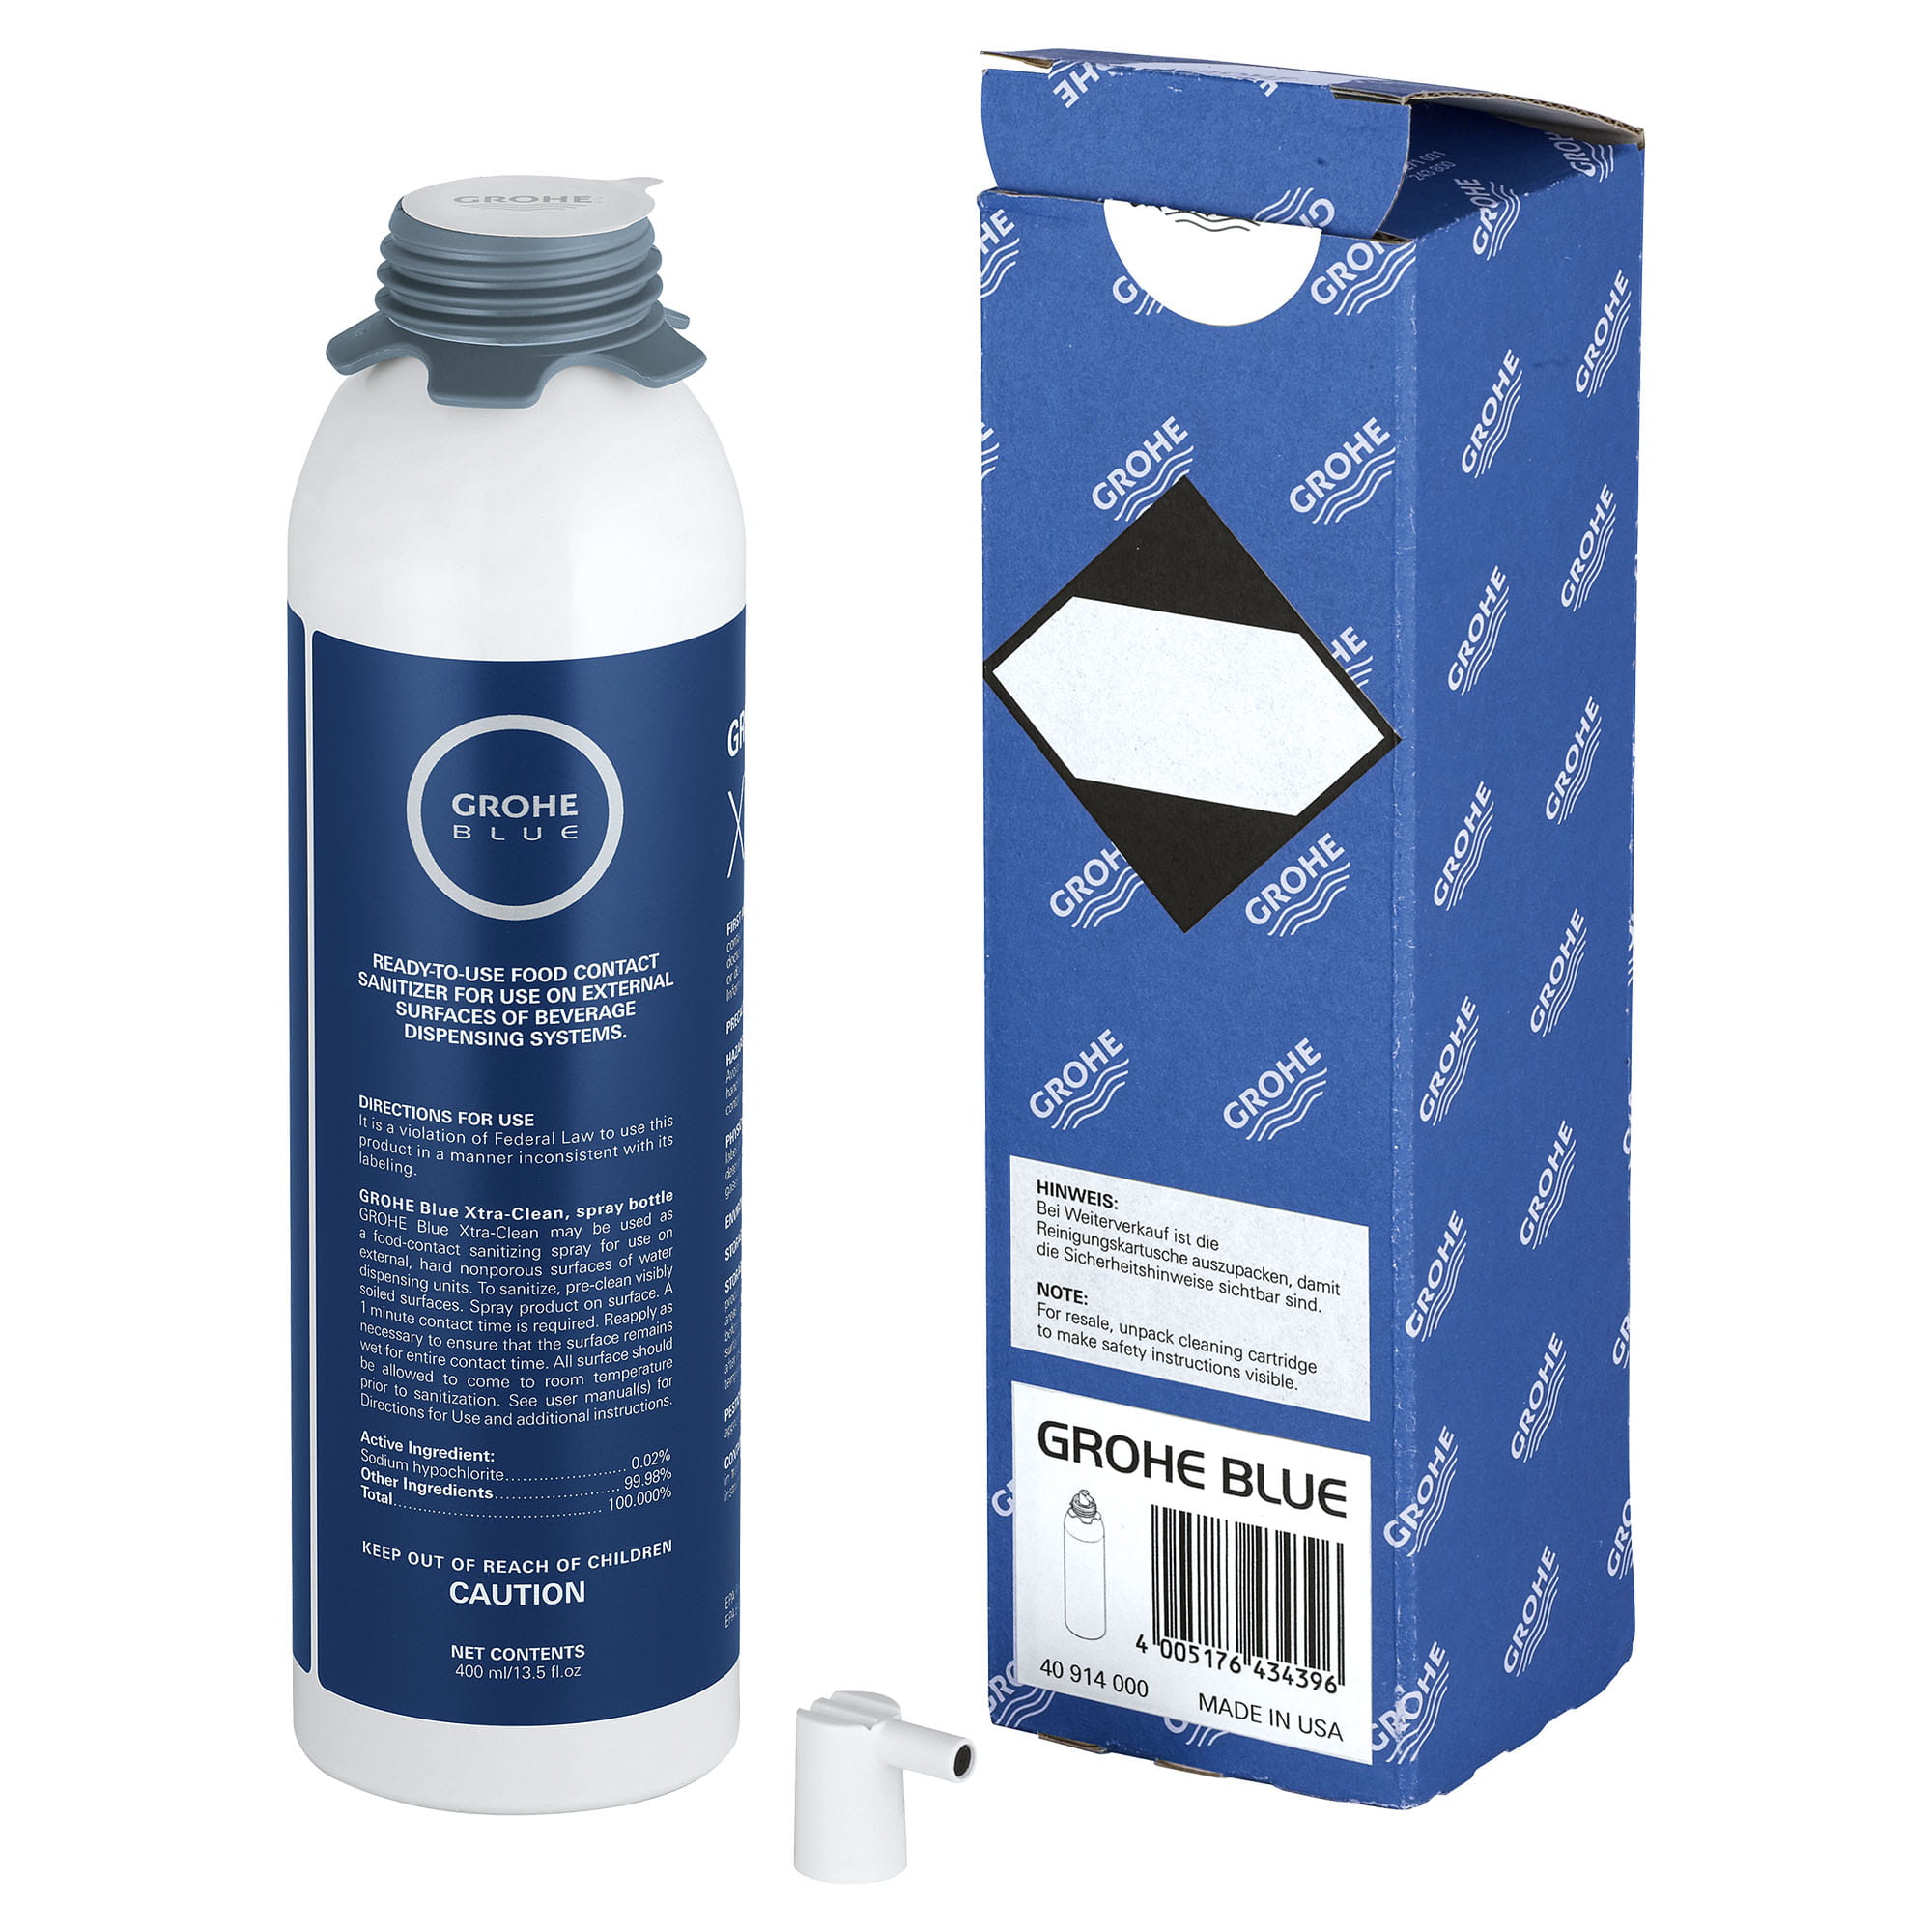 GROHE Blue Cleaning Cartridge NO FINISH